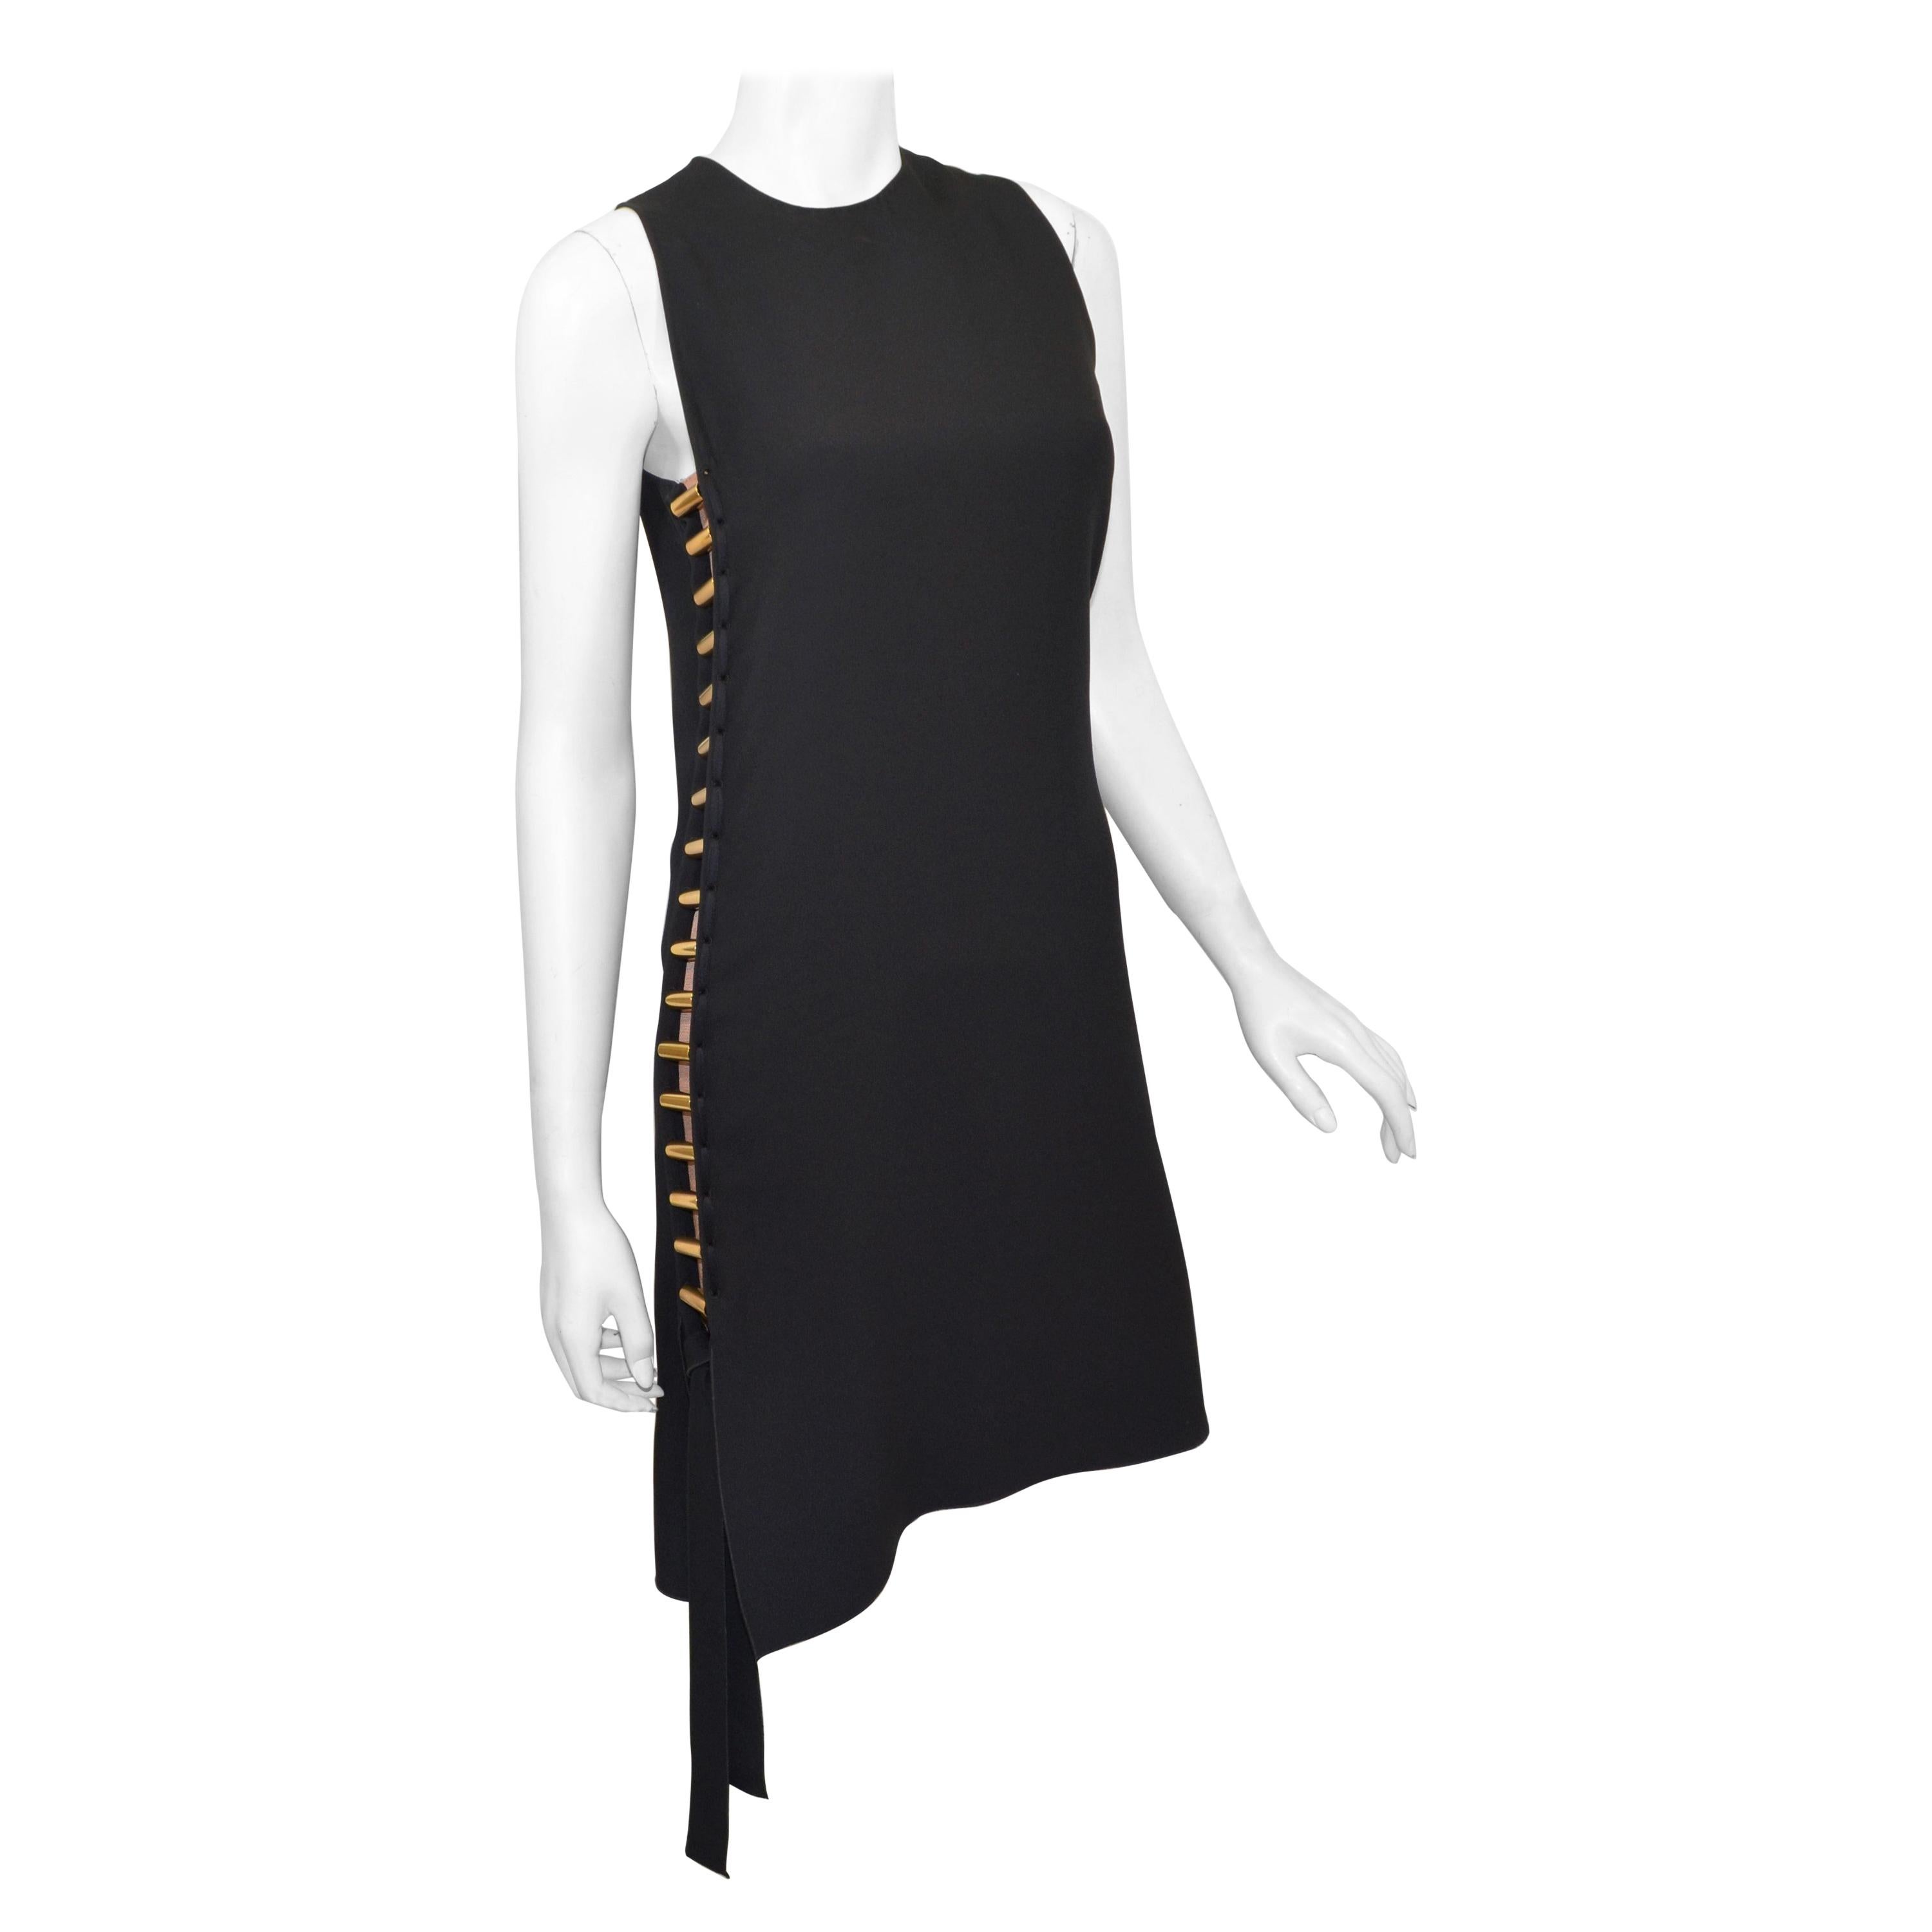 2015 Lanvin Spring/Summer Collection Black Dress with Gold Bar Panel